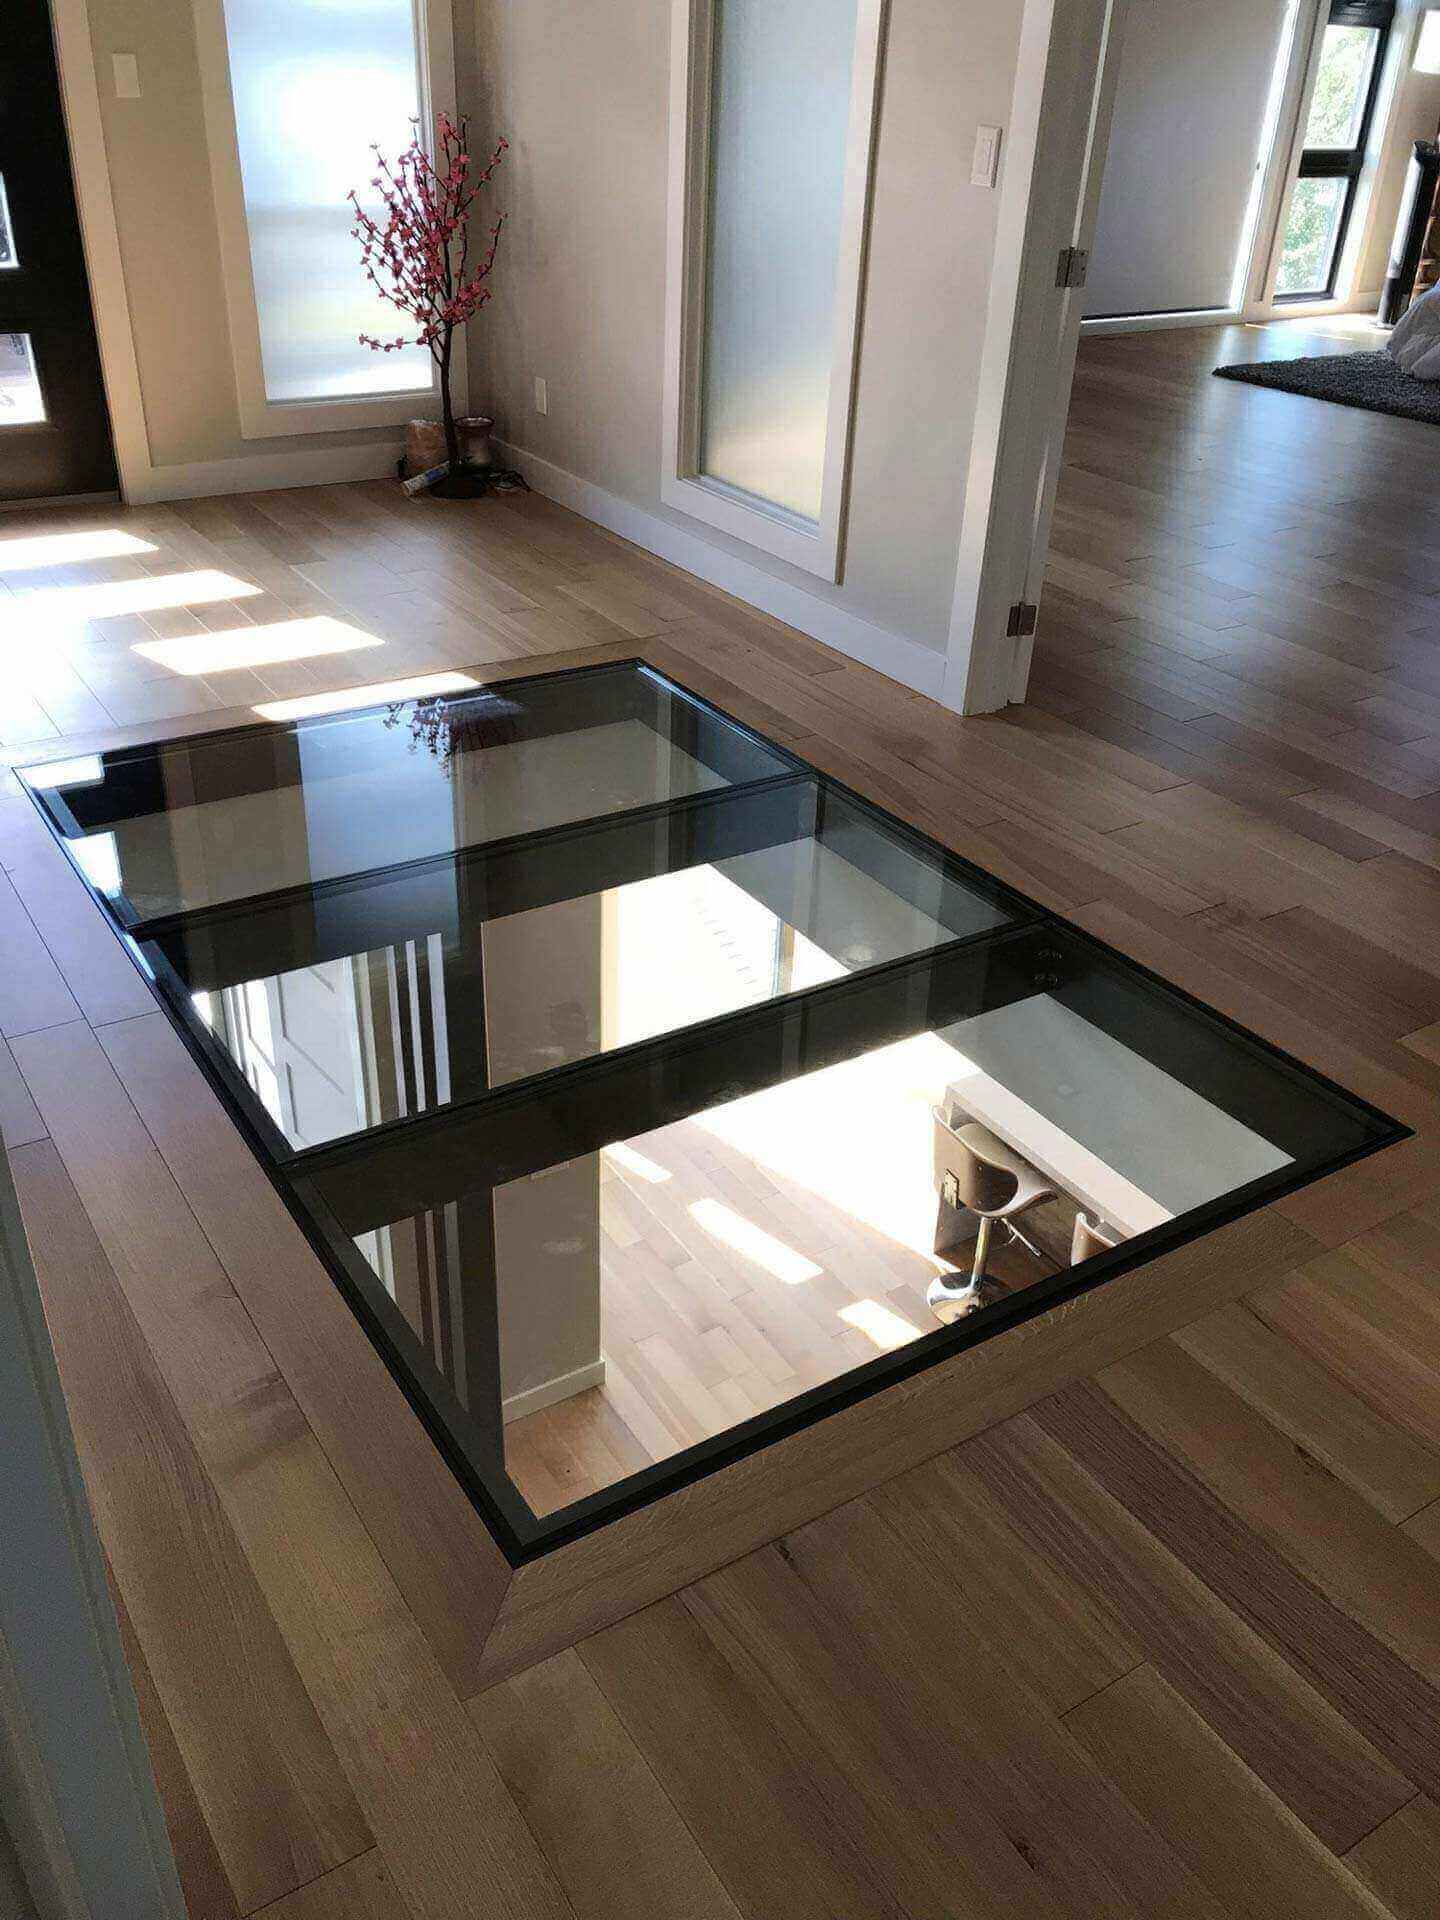 Laminated type of glass for windows and floors